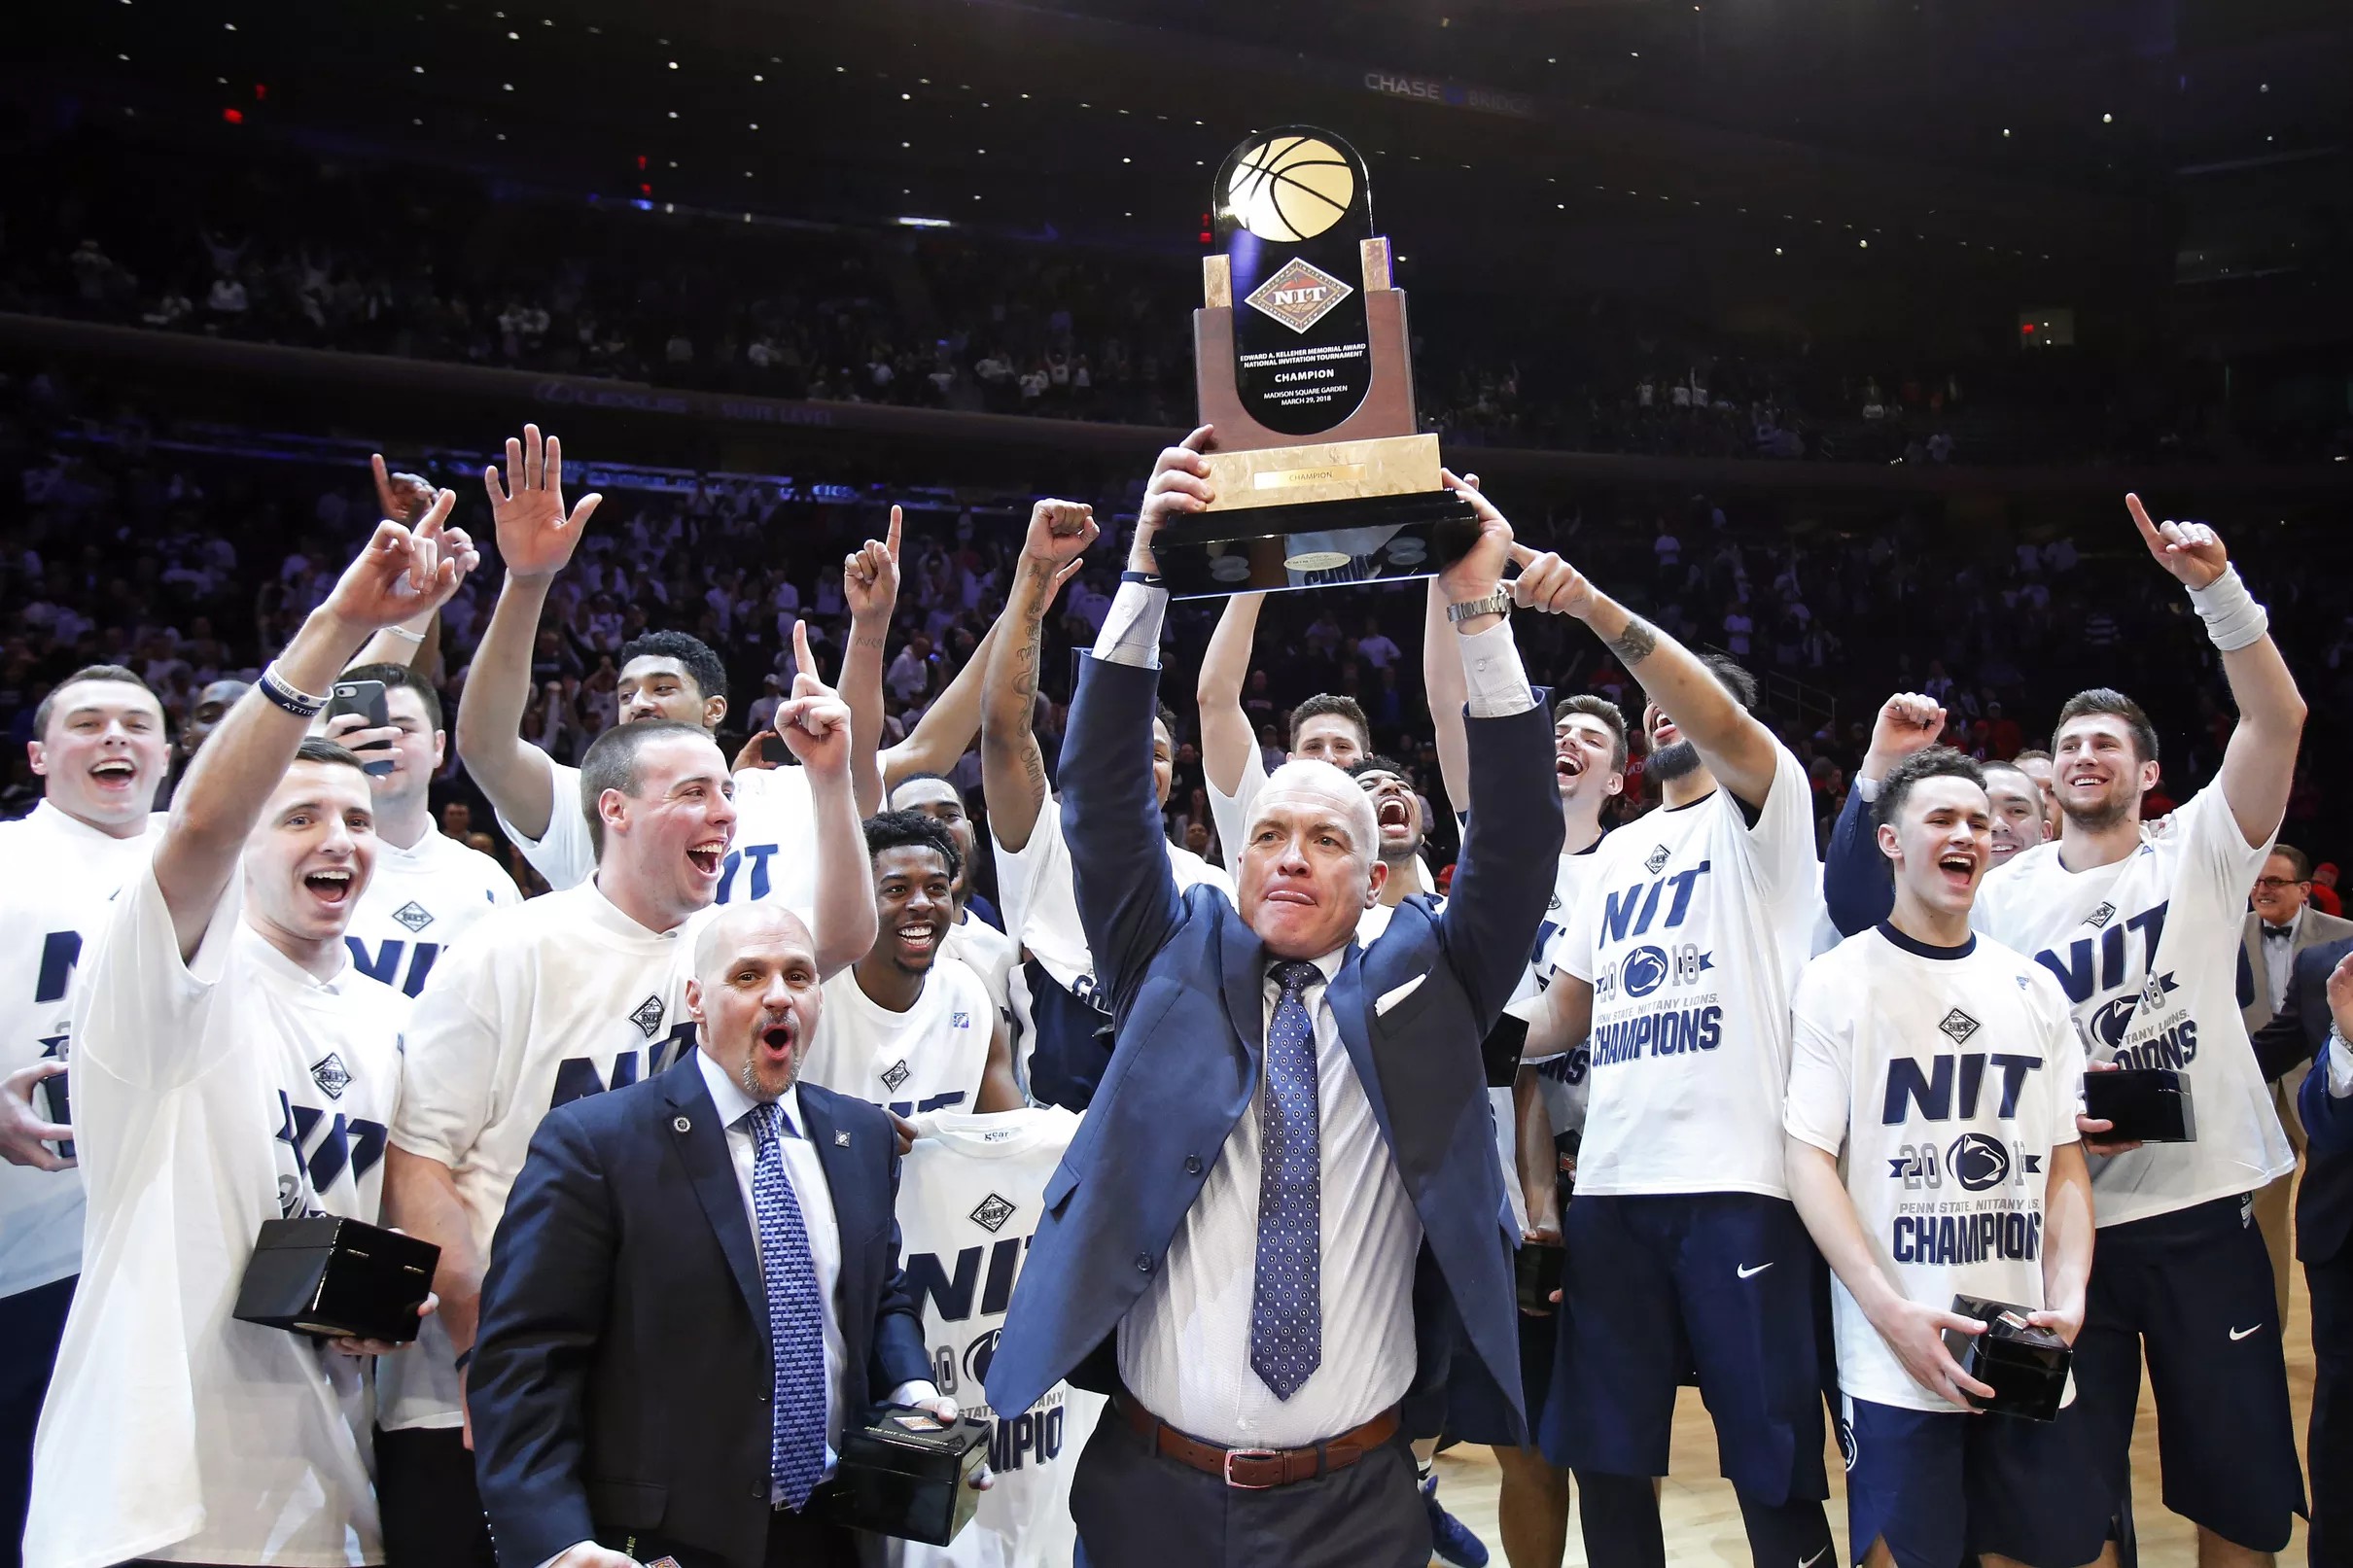 How to watch the 2019 NIT Selection Special